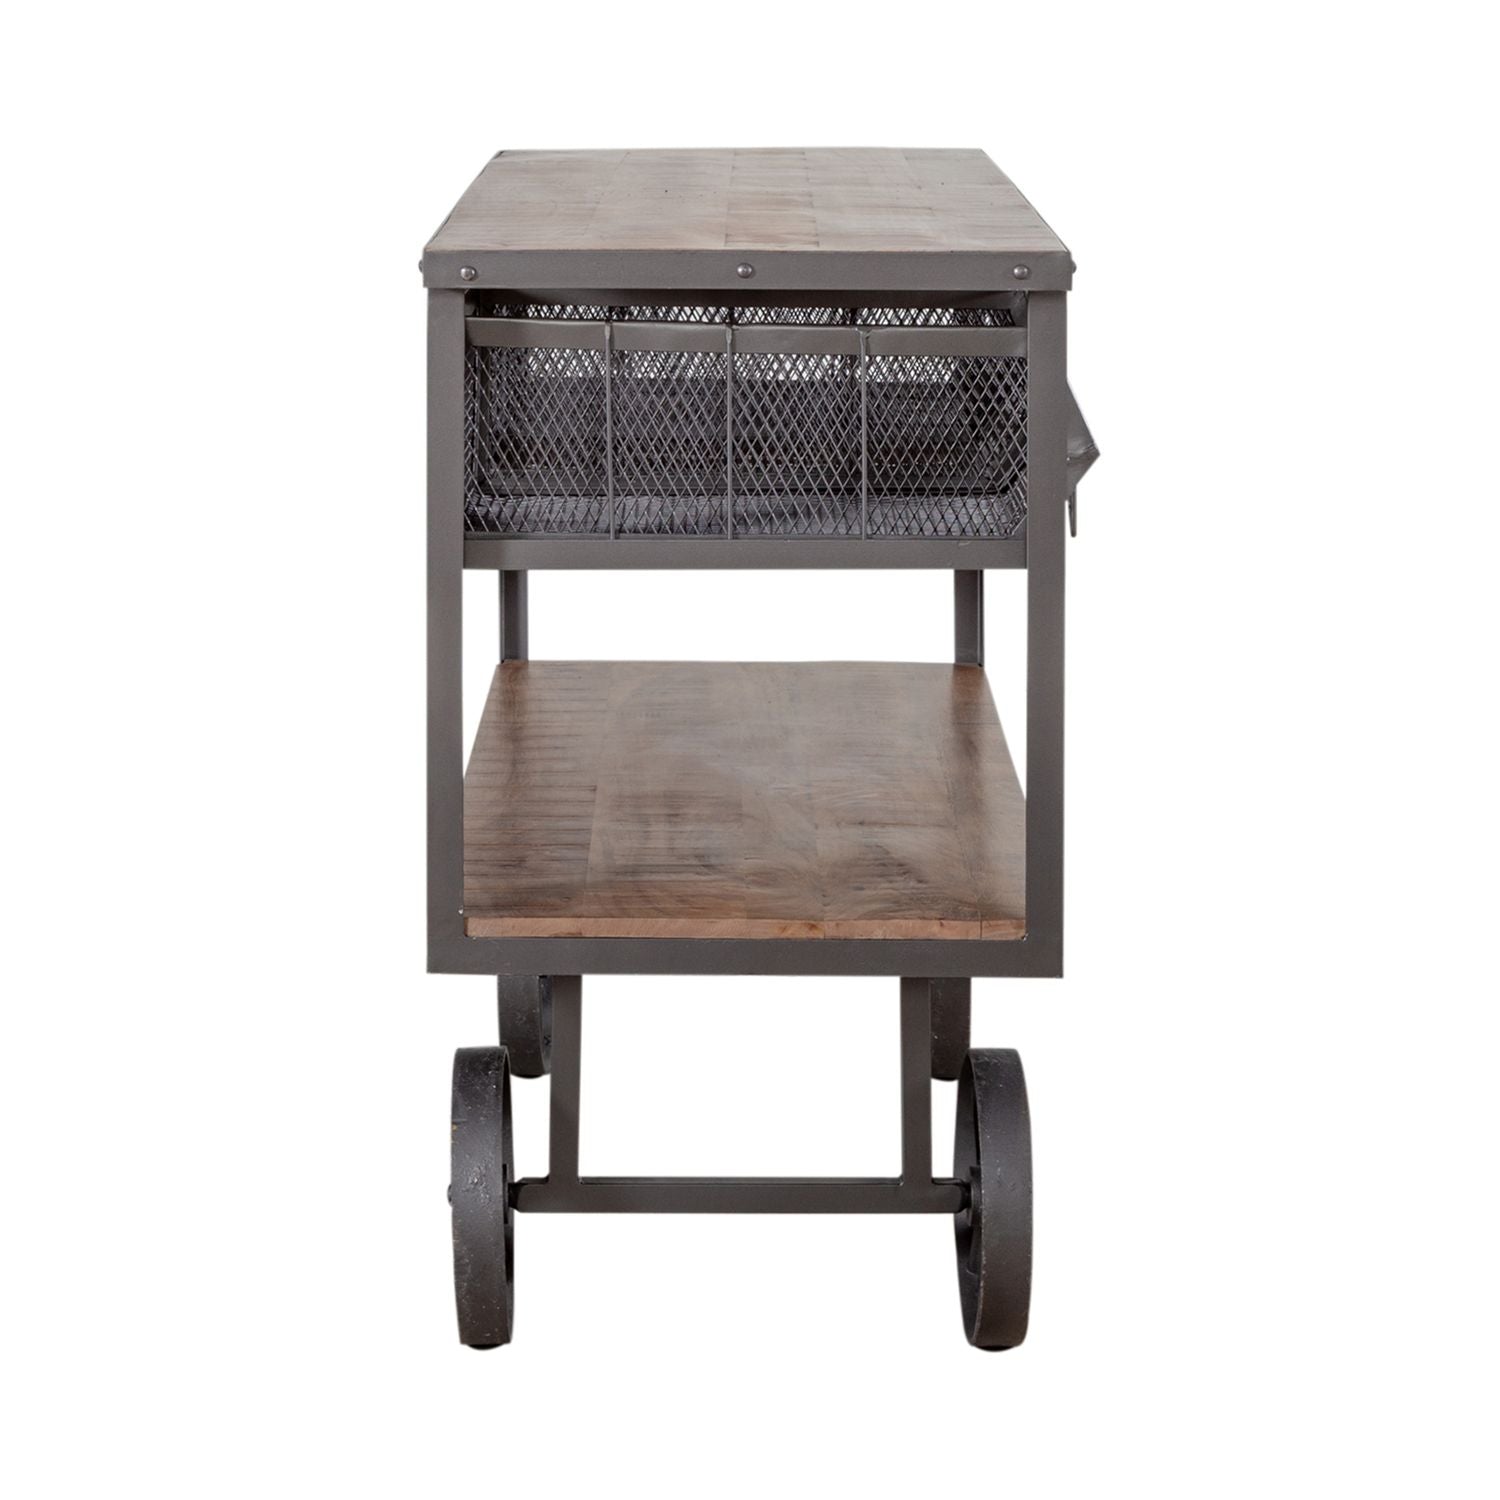 Gilivary Accent Trolley